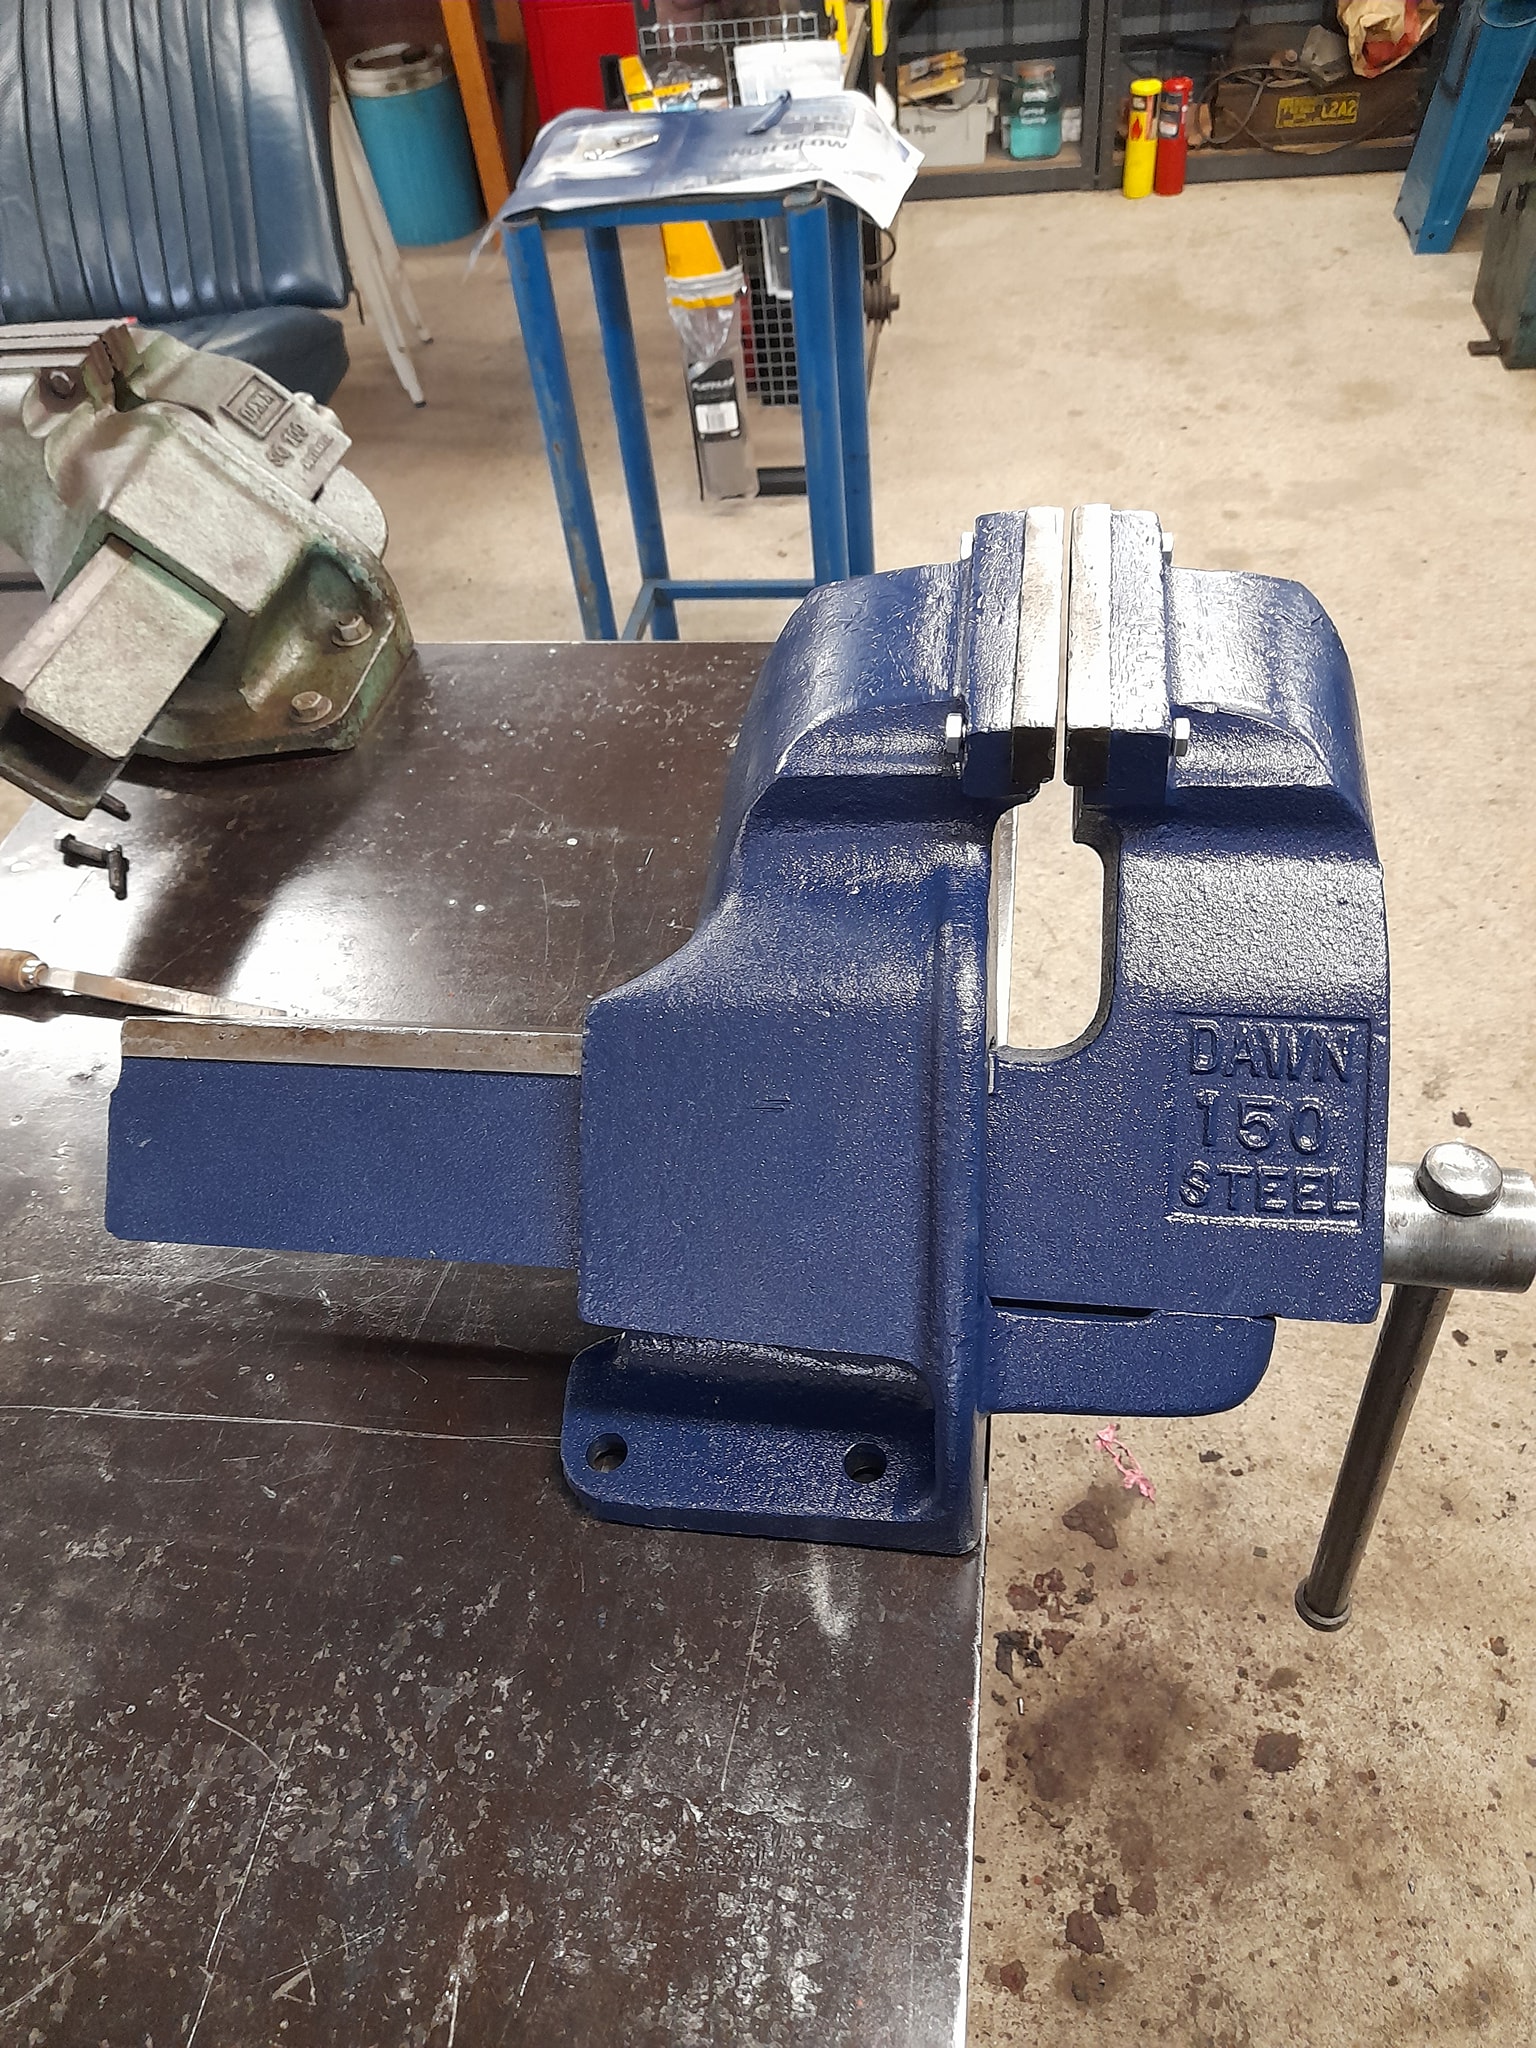 Here is an example of a suitable dark blue colour for a Dawn cast steel vice.